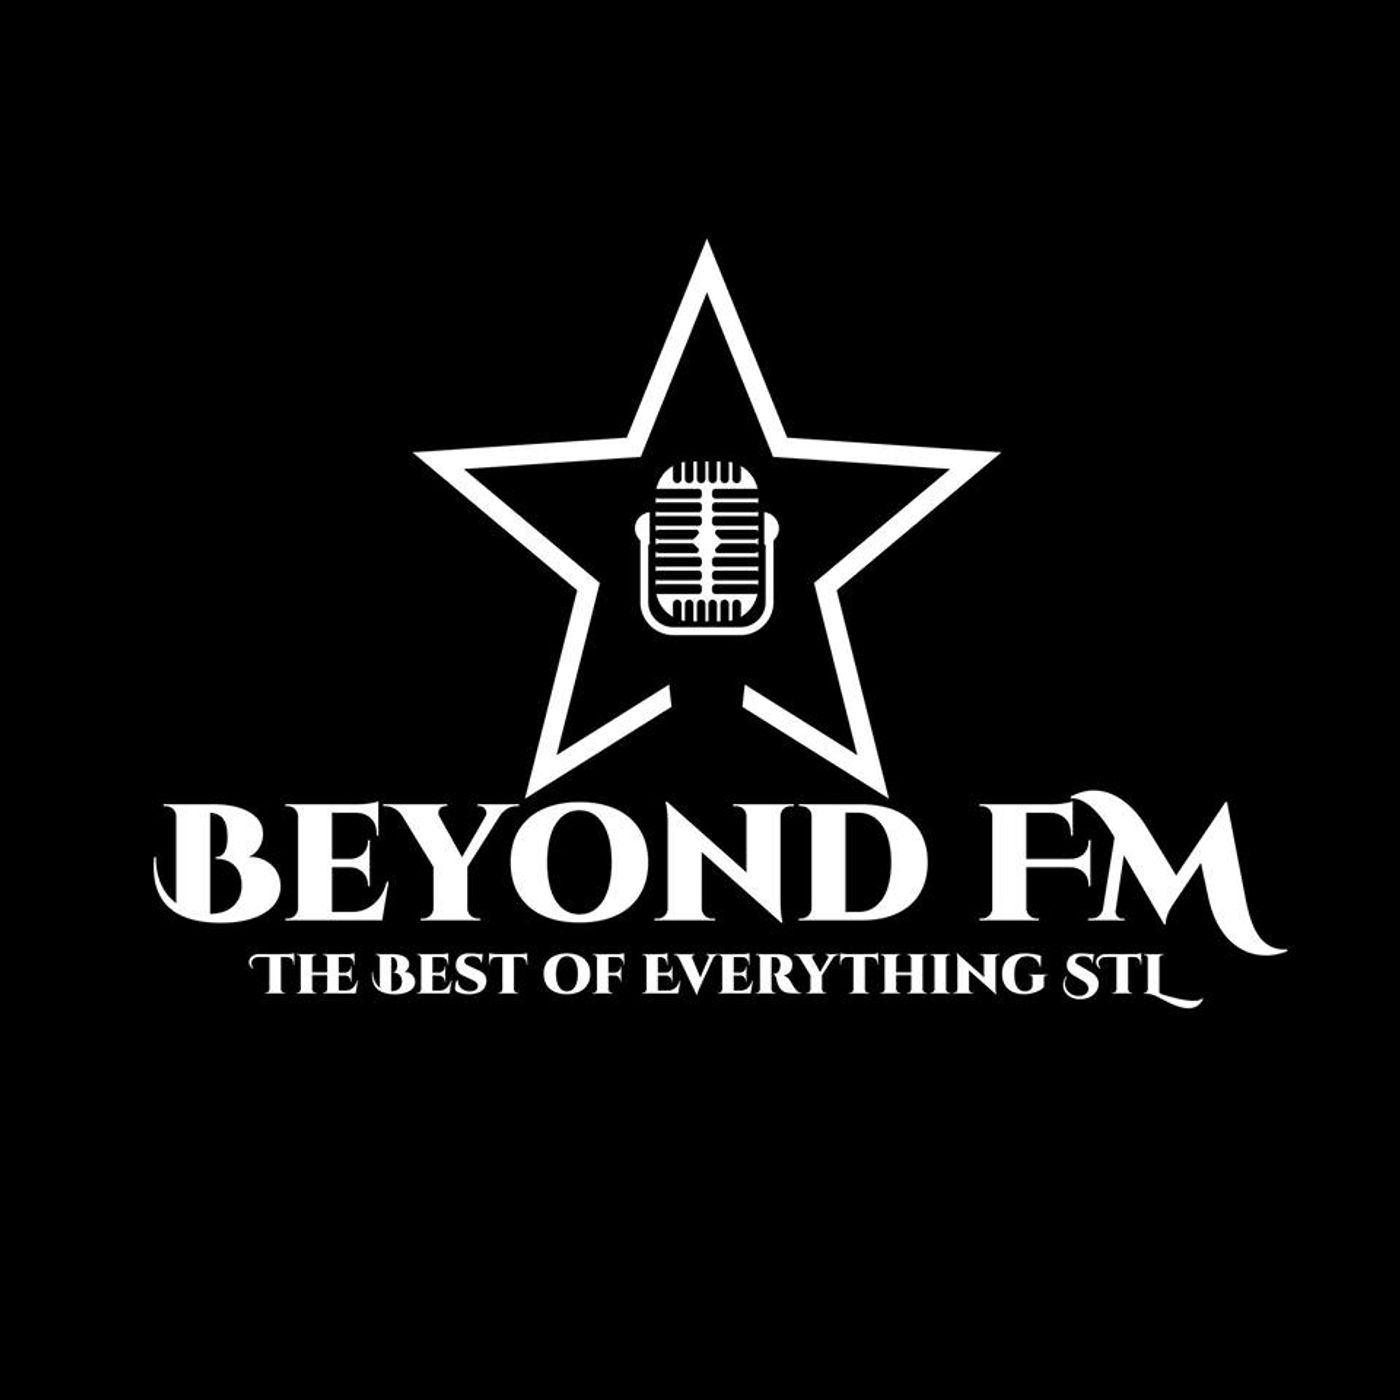 BEYOND FM – THE BEST OF EVERYTHING STL